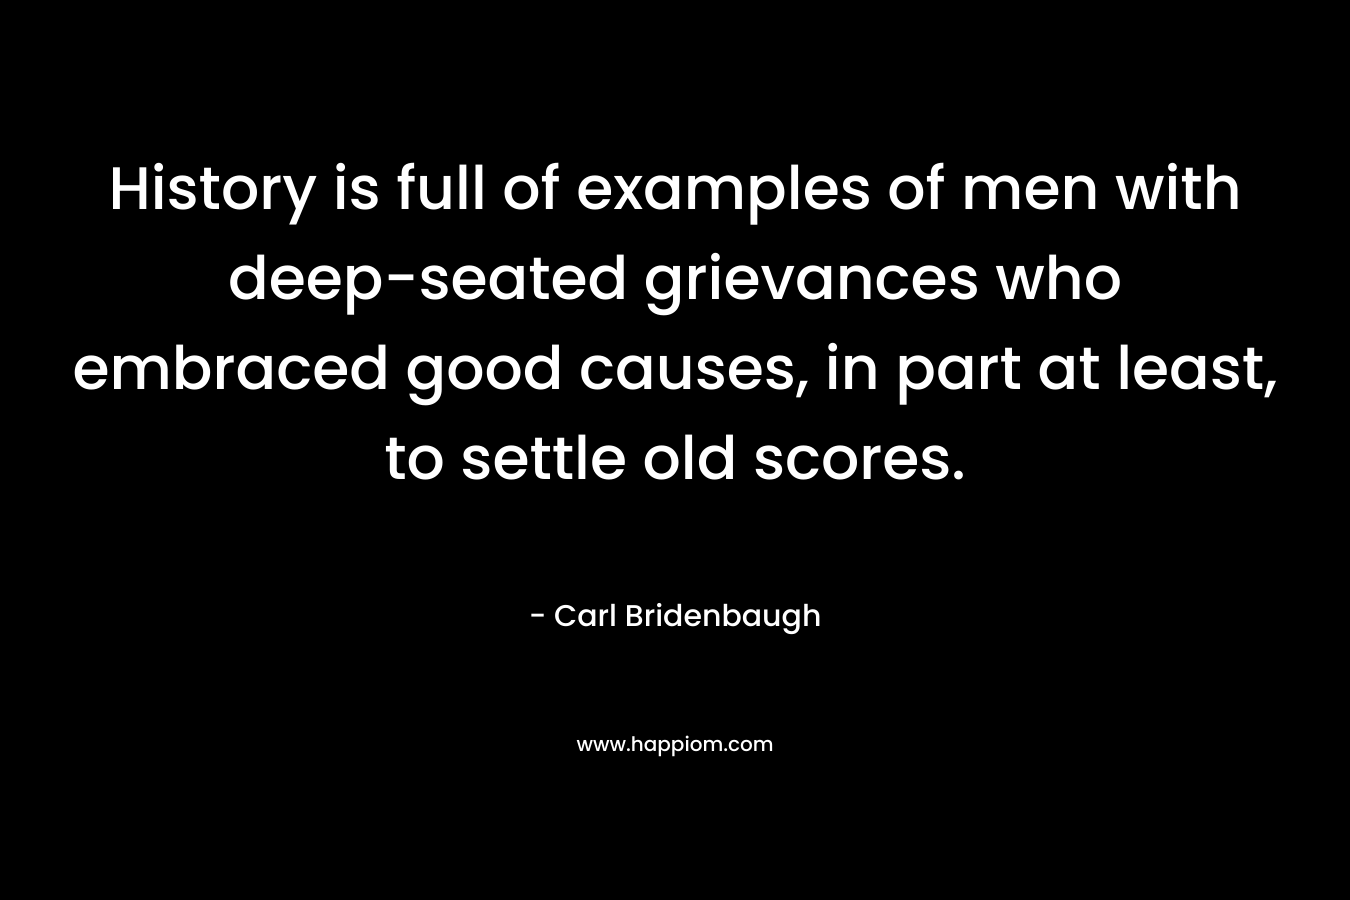 History is full of examples of men with deep-seated grievances who embraced good causes, in part at least, to settle old scores.